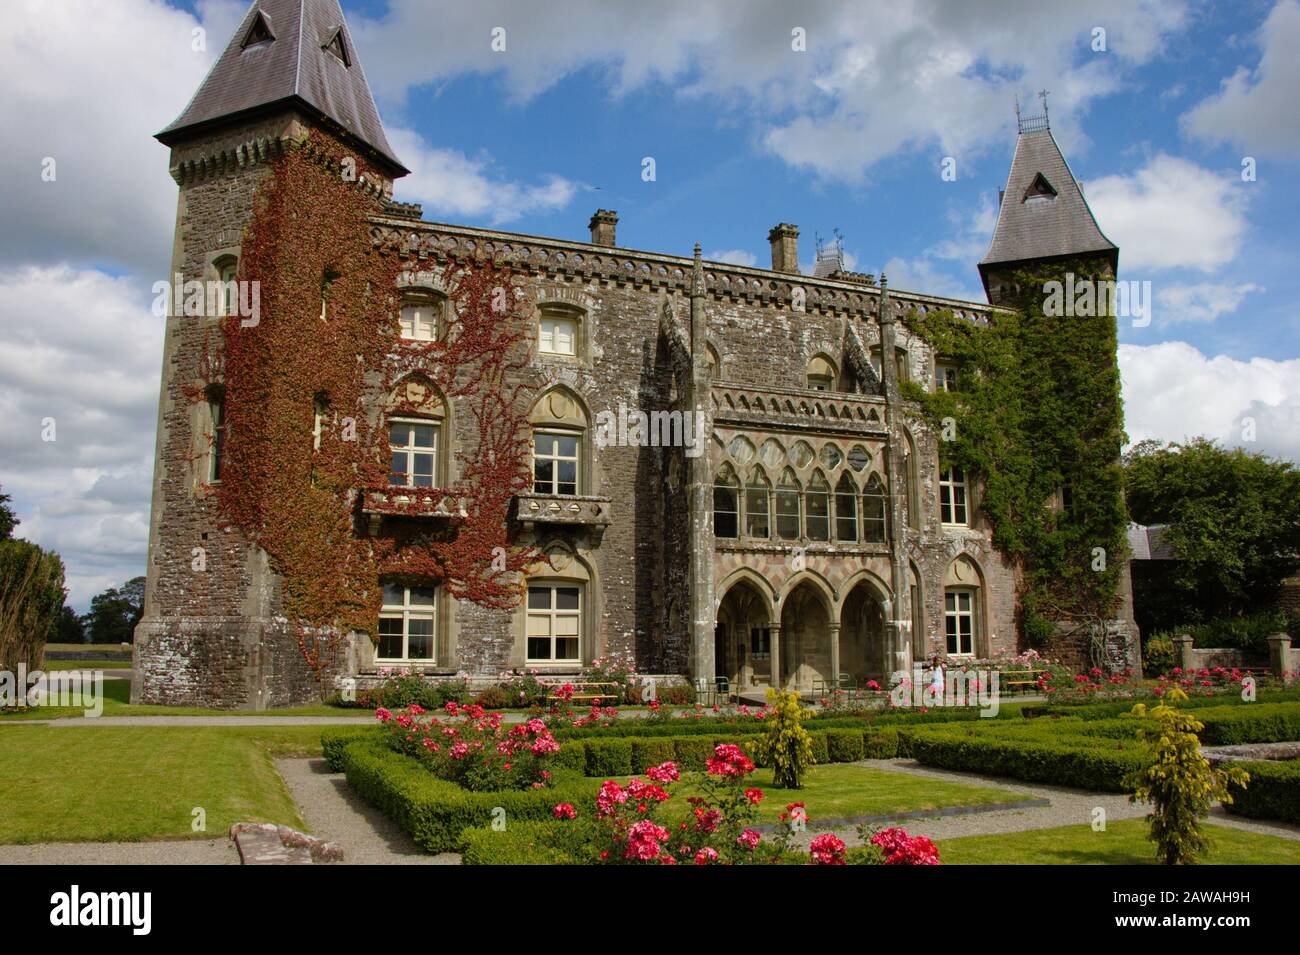 Newton house at Dinefwr. Mansion in South Wales, UK. Stock Photo